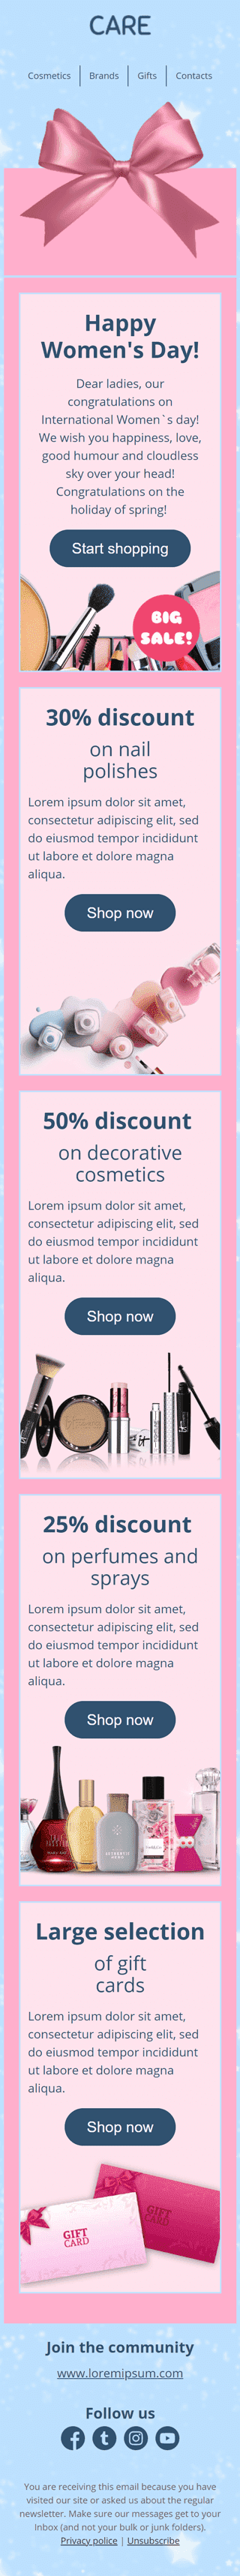 Women's Day Email Template «Gift box» for Beauty & Personal Care industry mobile view